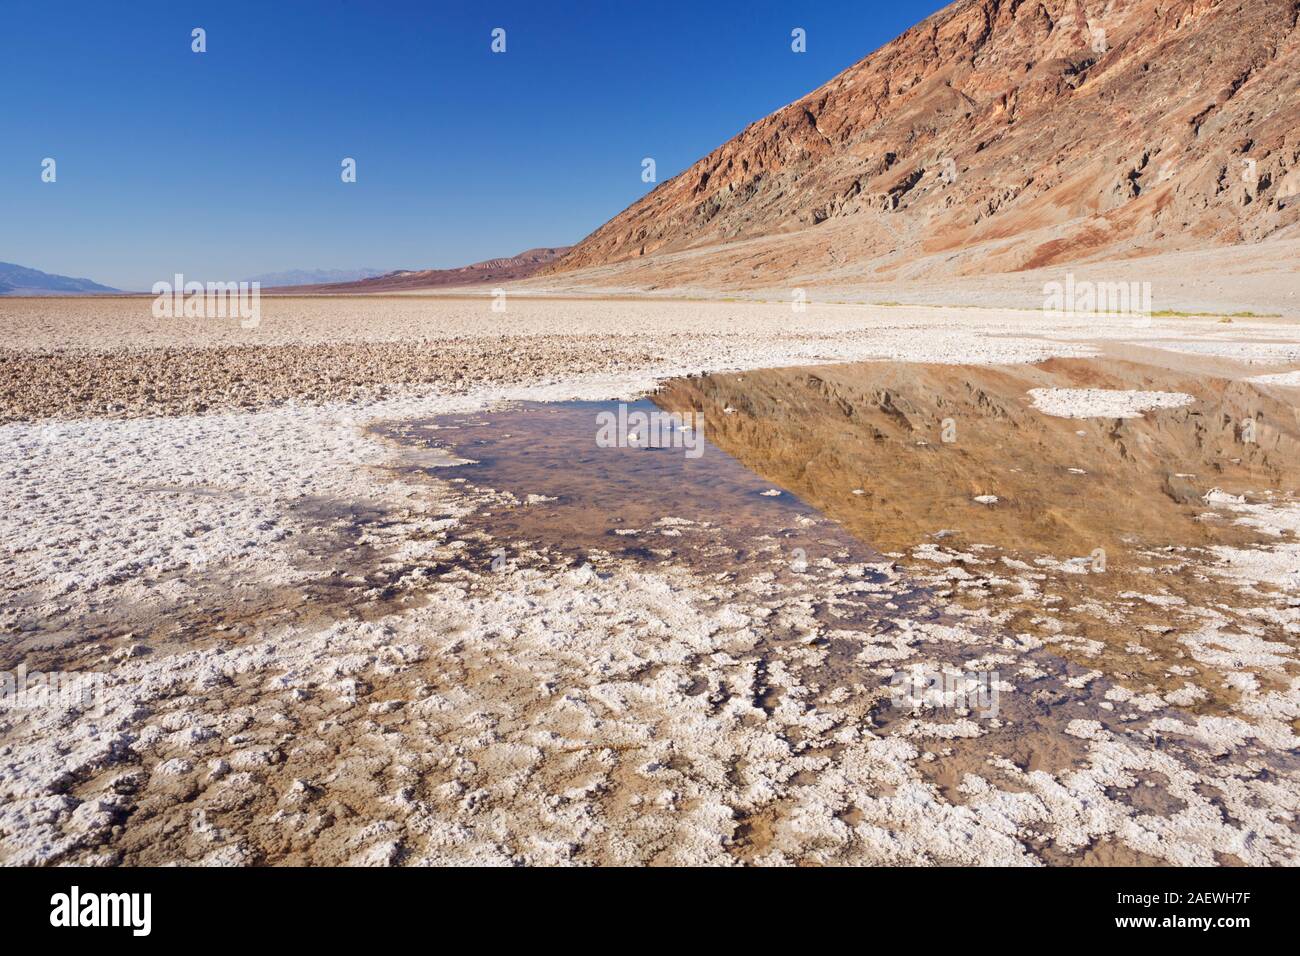 Mountains reflected in the water at Badwater Basin in Death Valley National Park, California, USA. Stock Photo